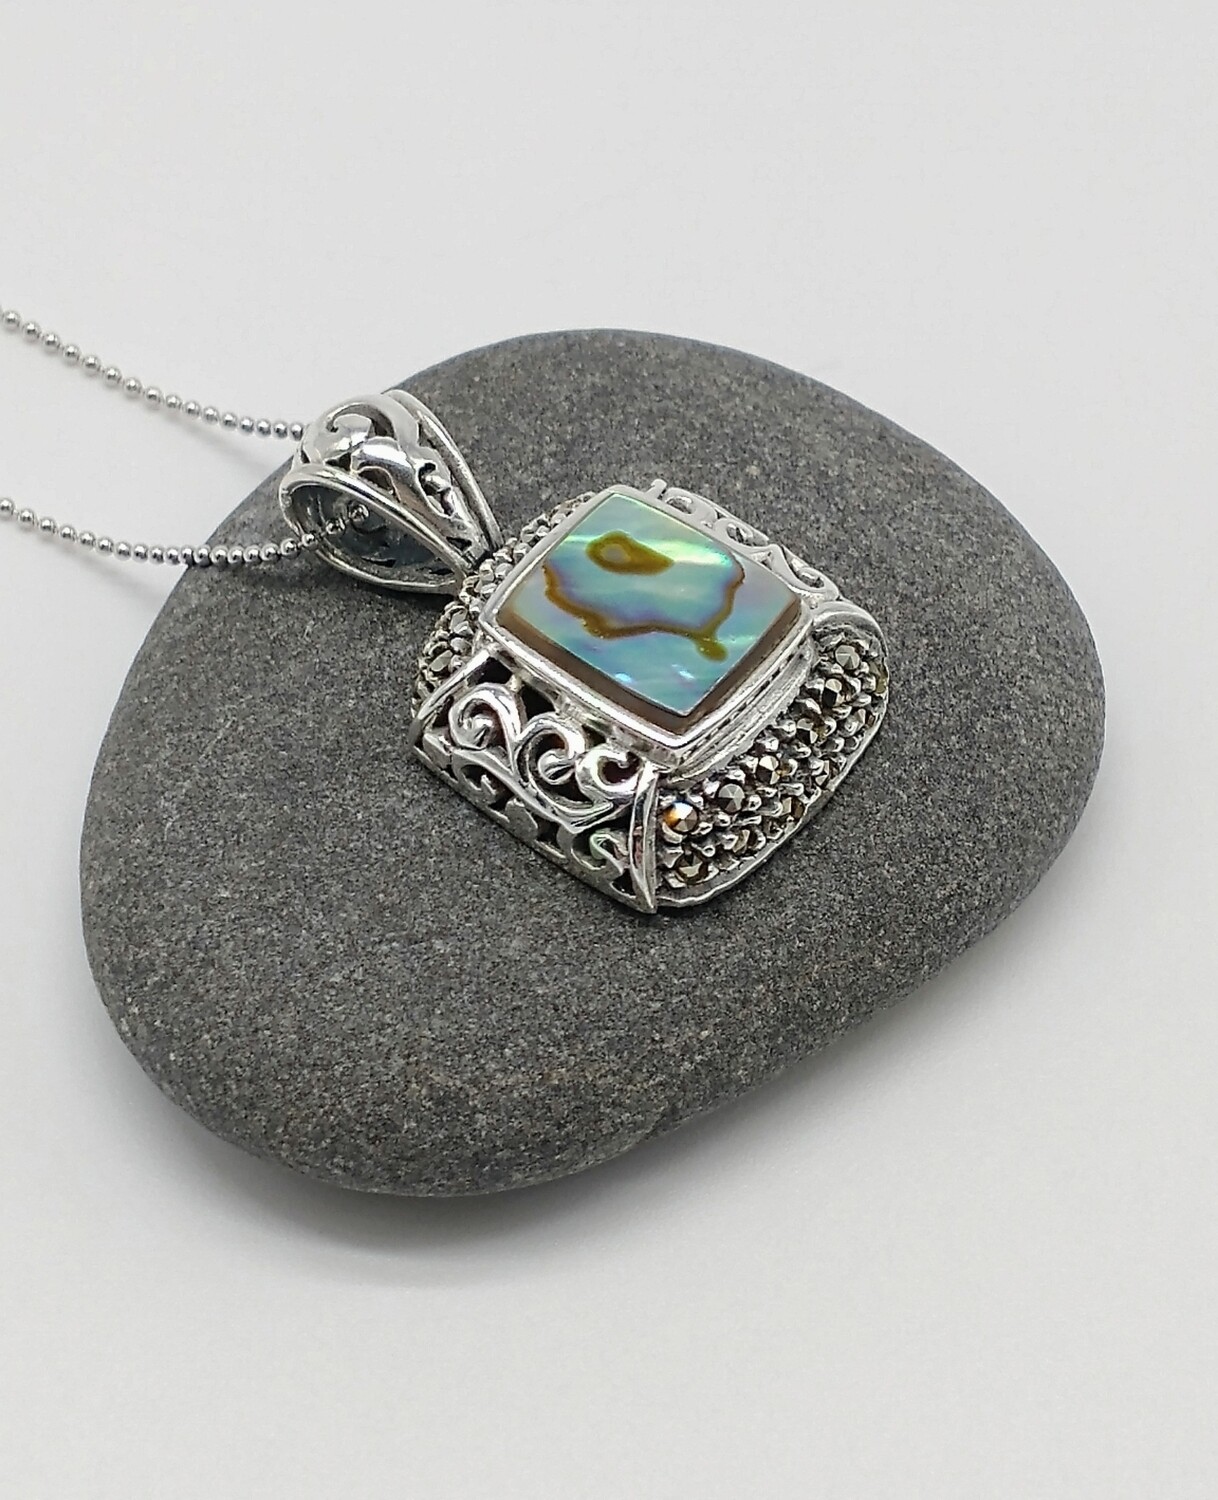 STERLING SILVER ABALONE MARCASITE PENDANT NECKLACE